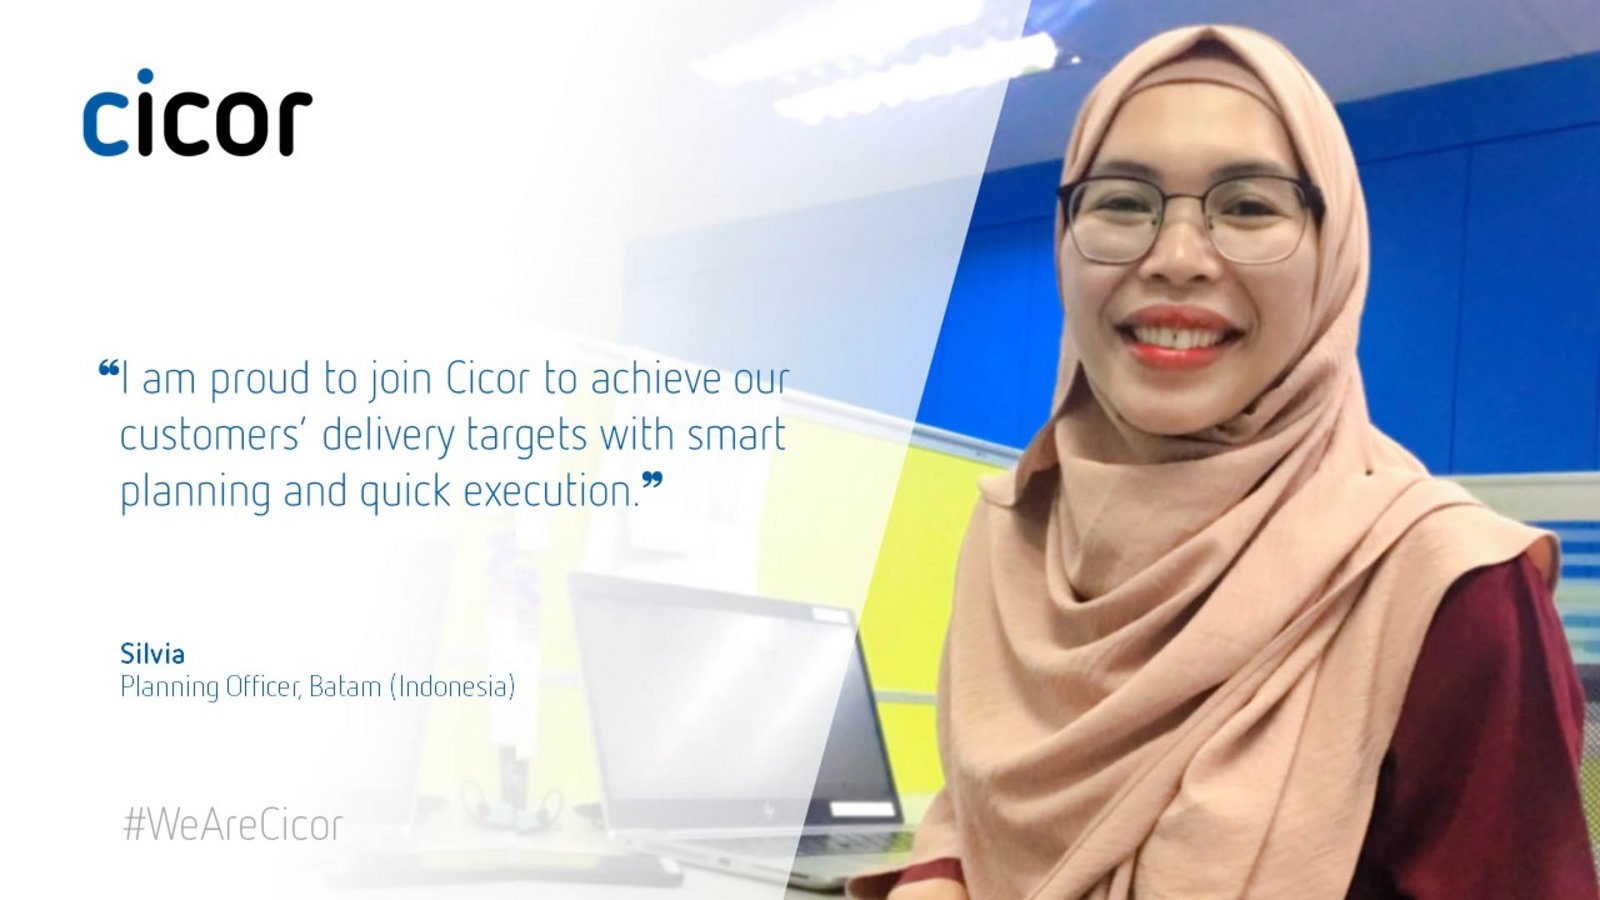 Testimonial of Silvia who works at the Cicor site in Batam